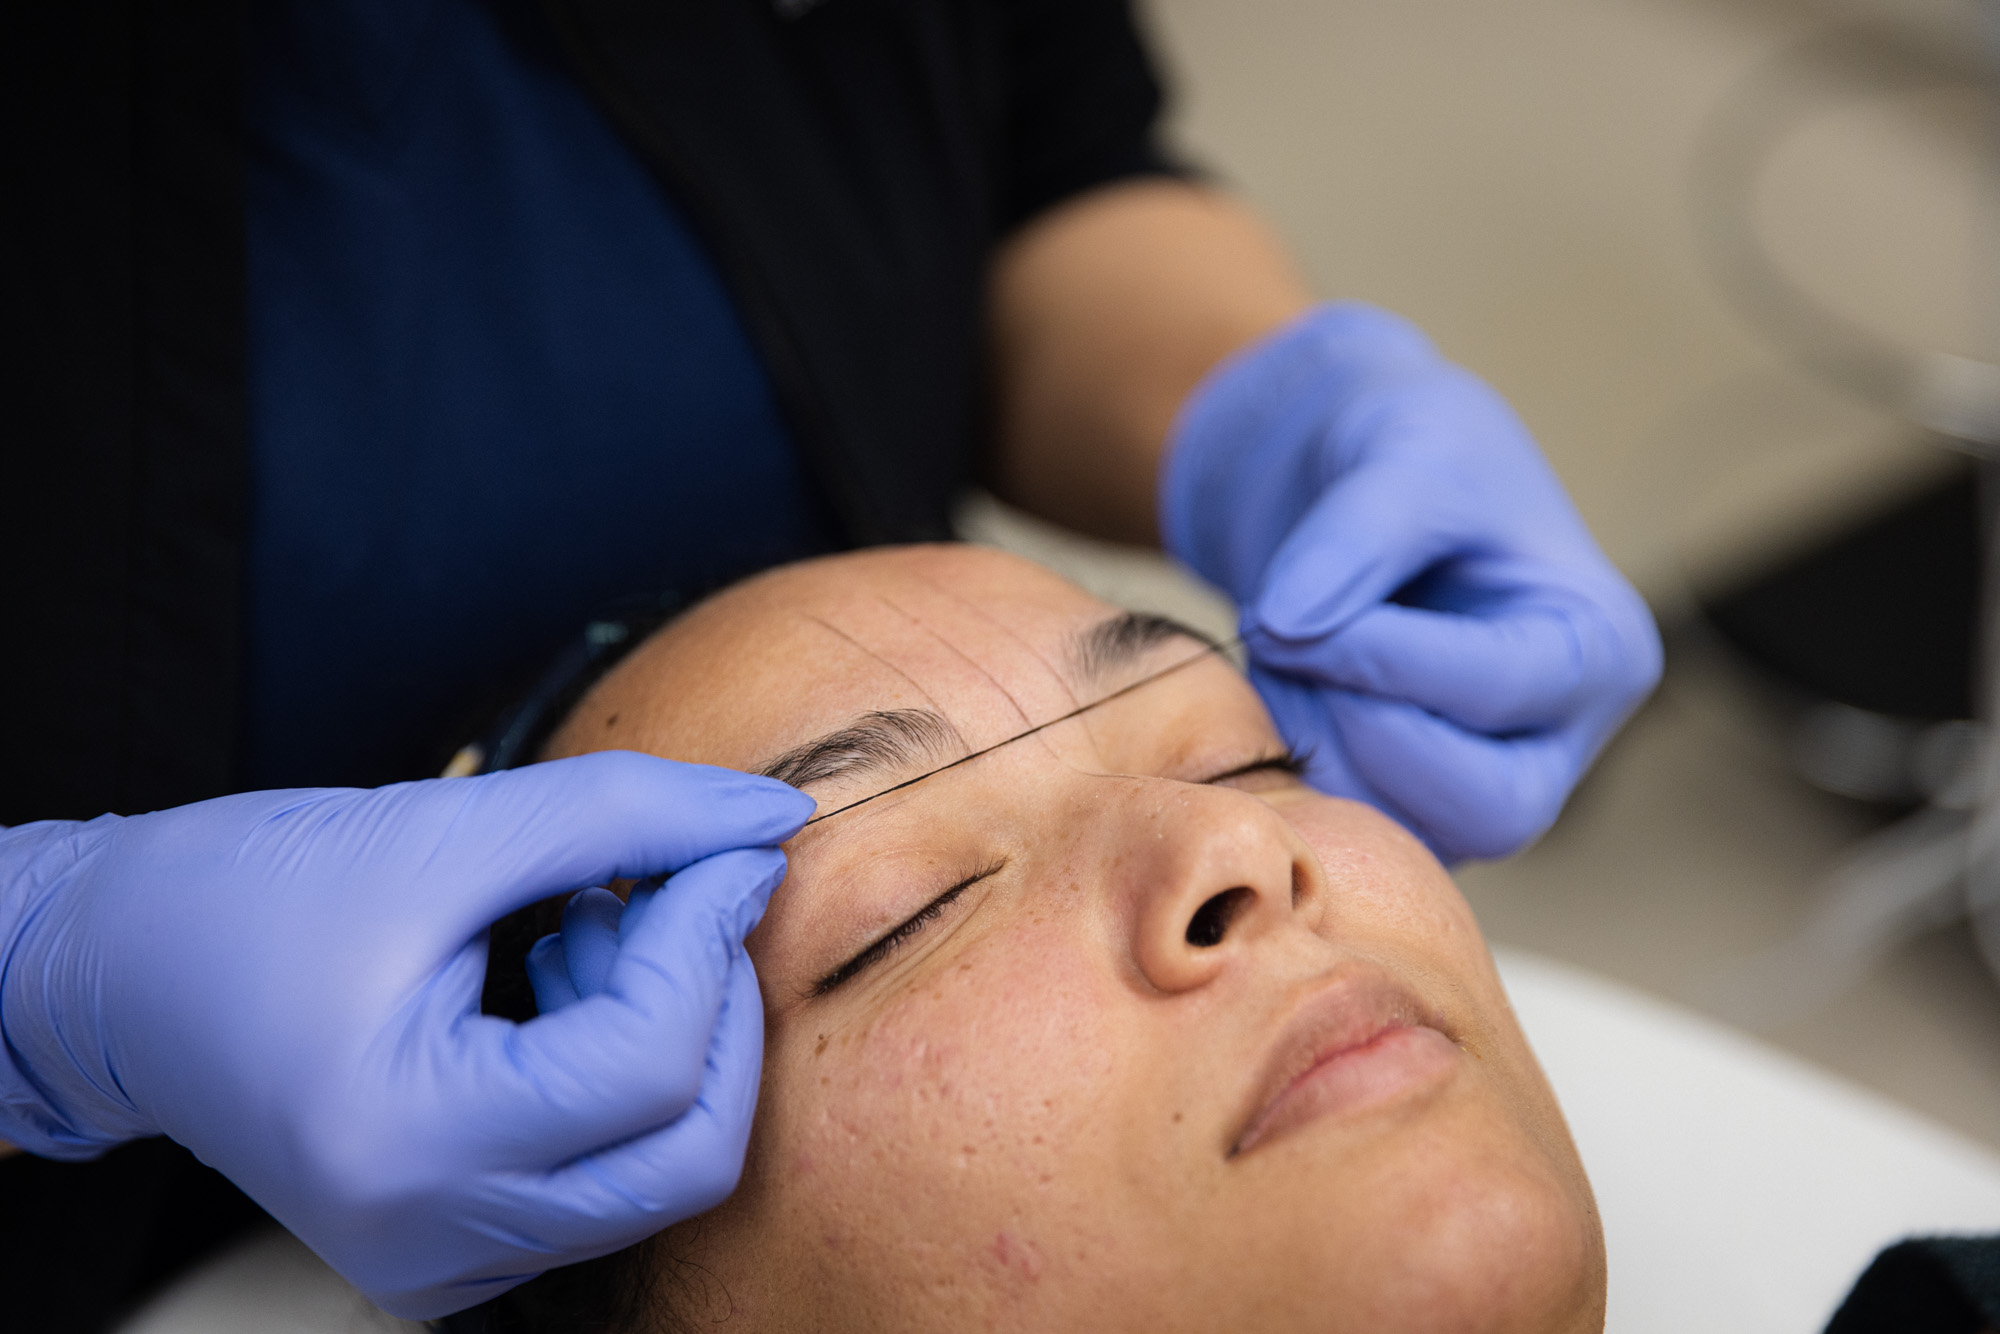 Microblading being used on a relaxed patient's face. Microblading is a non-invasive, non surgical procedure for fuller eyebrows.